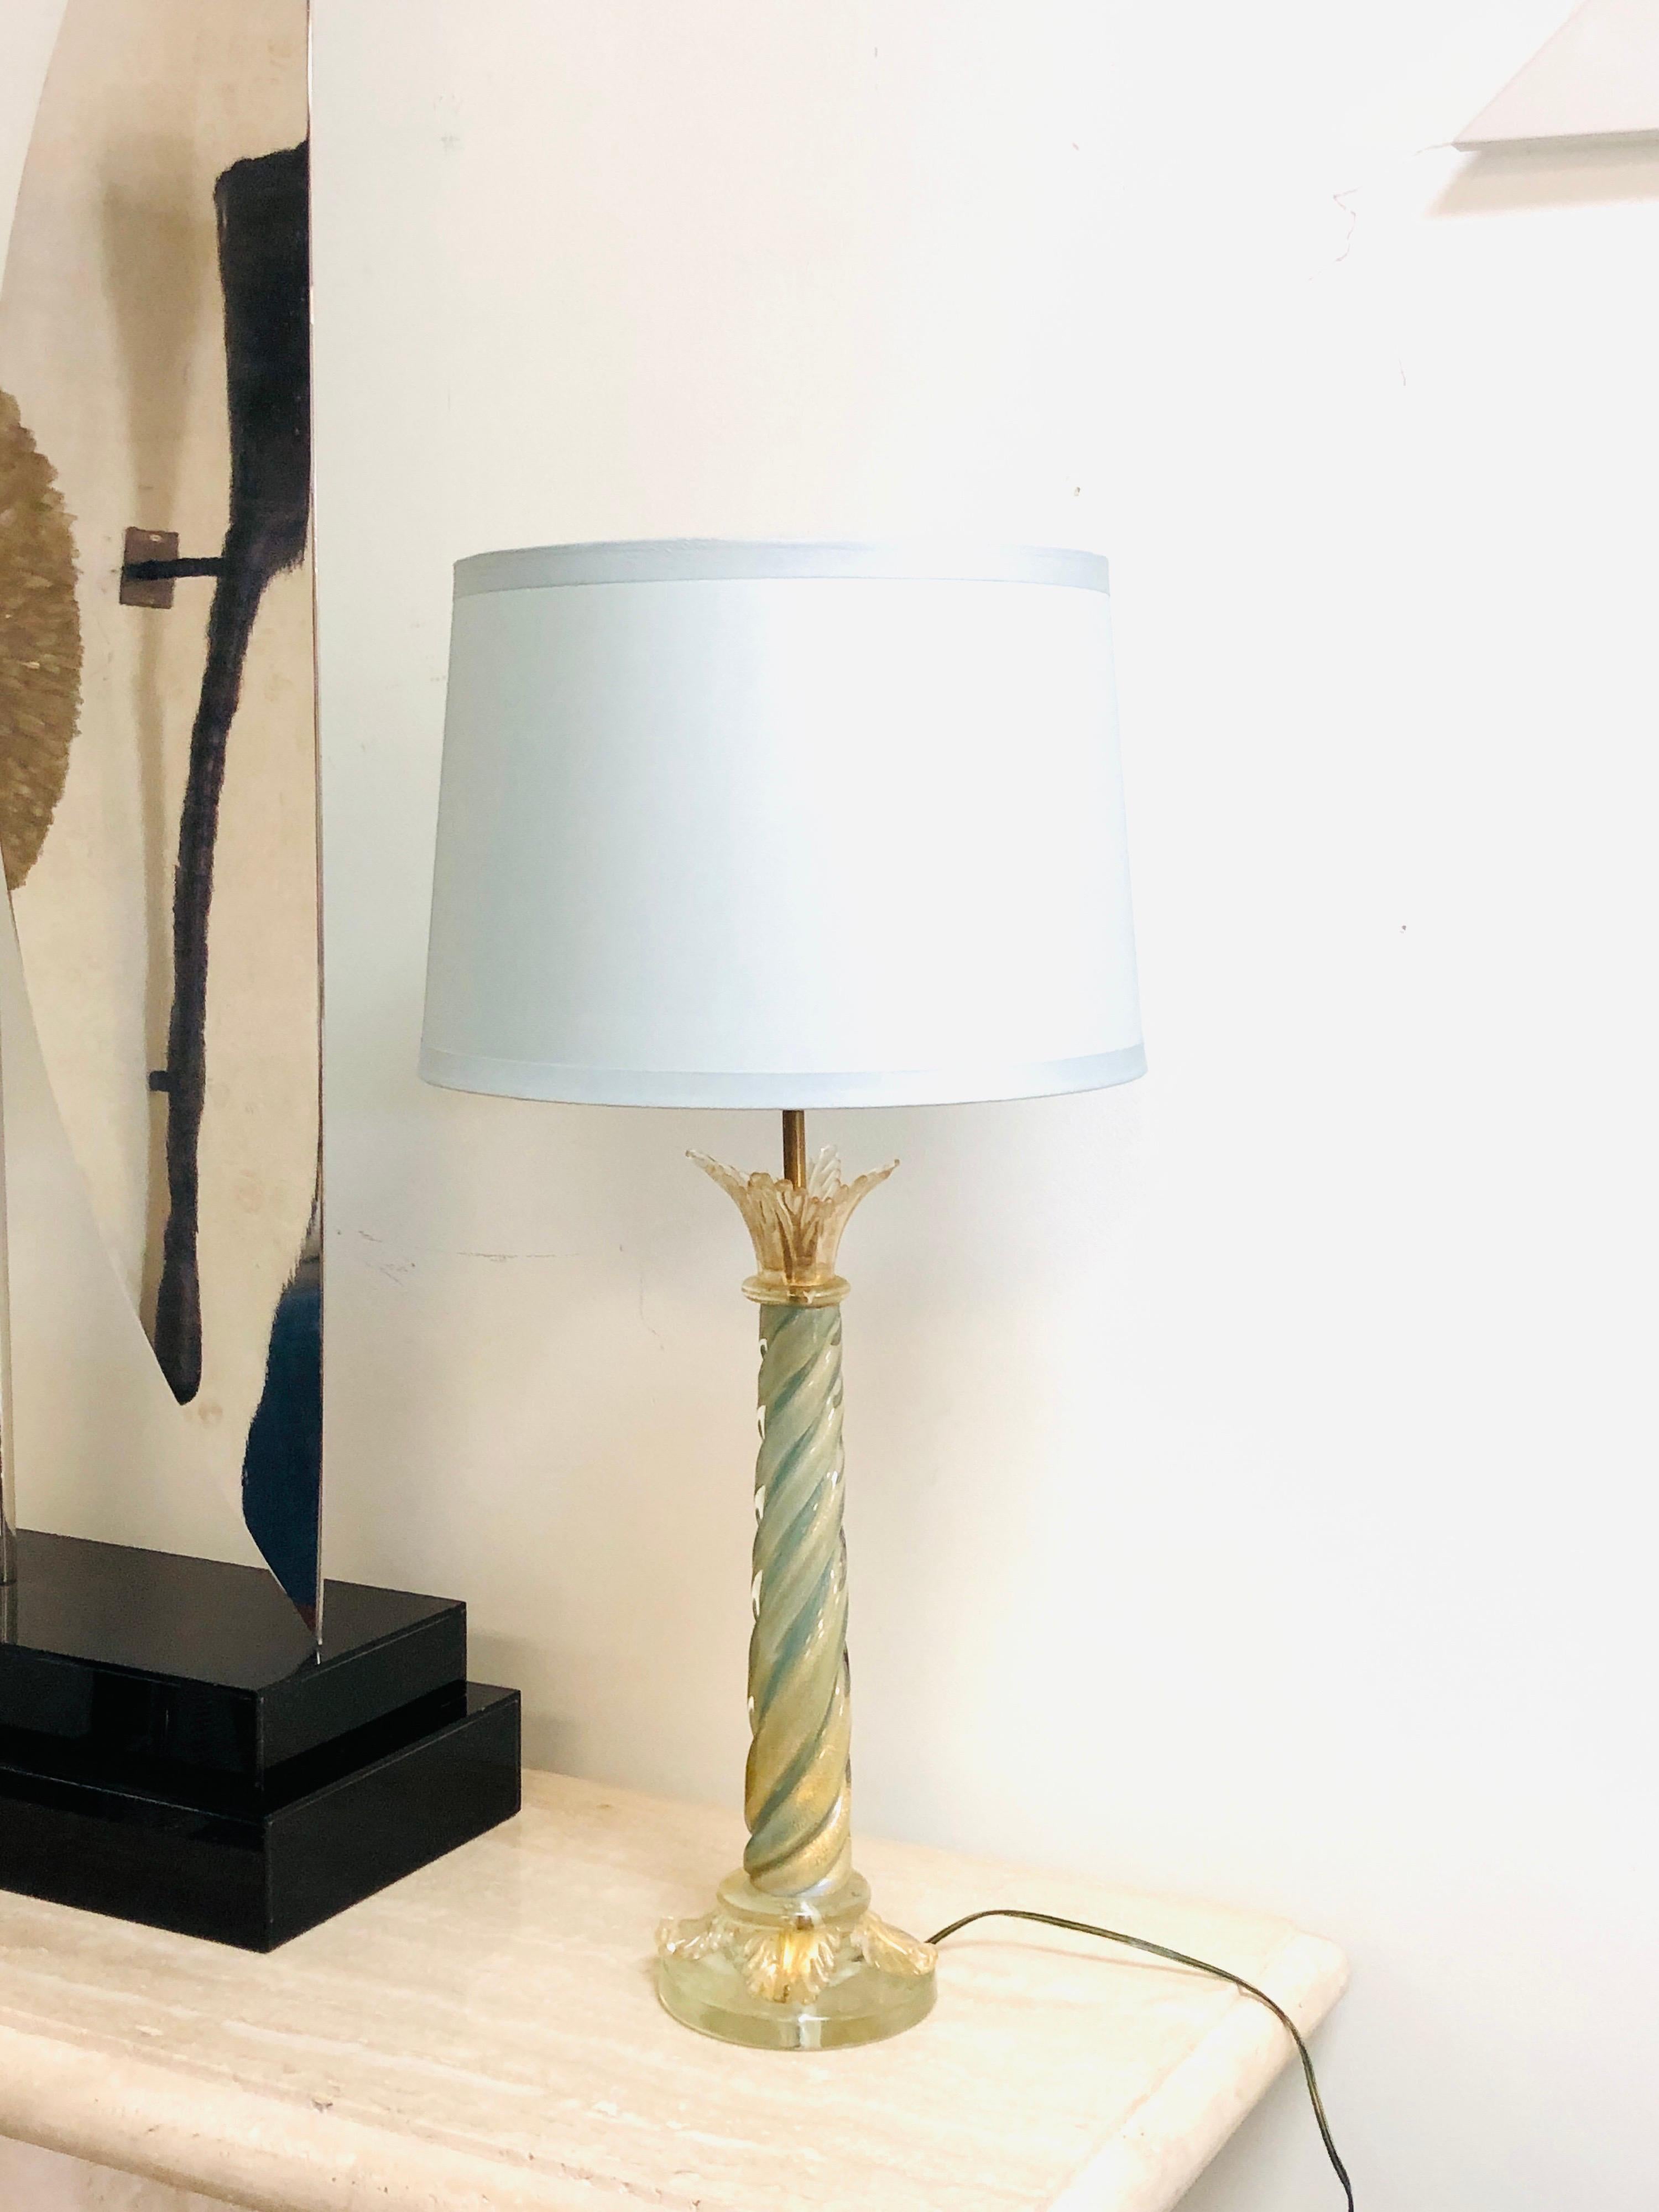 Magnificent mid century murano table lamp. Retains original double socket cluster. Needs a shade. Art glass base is 19